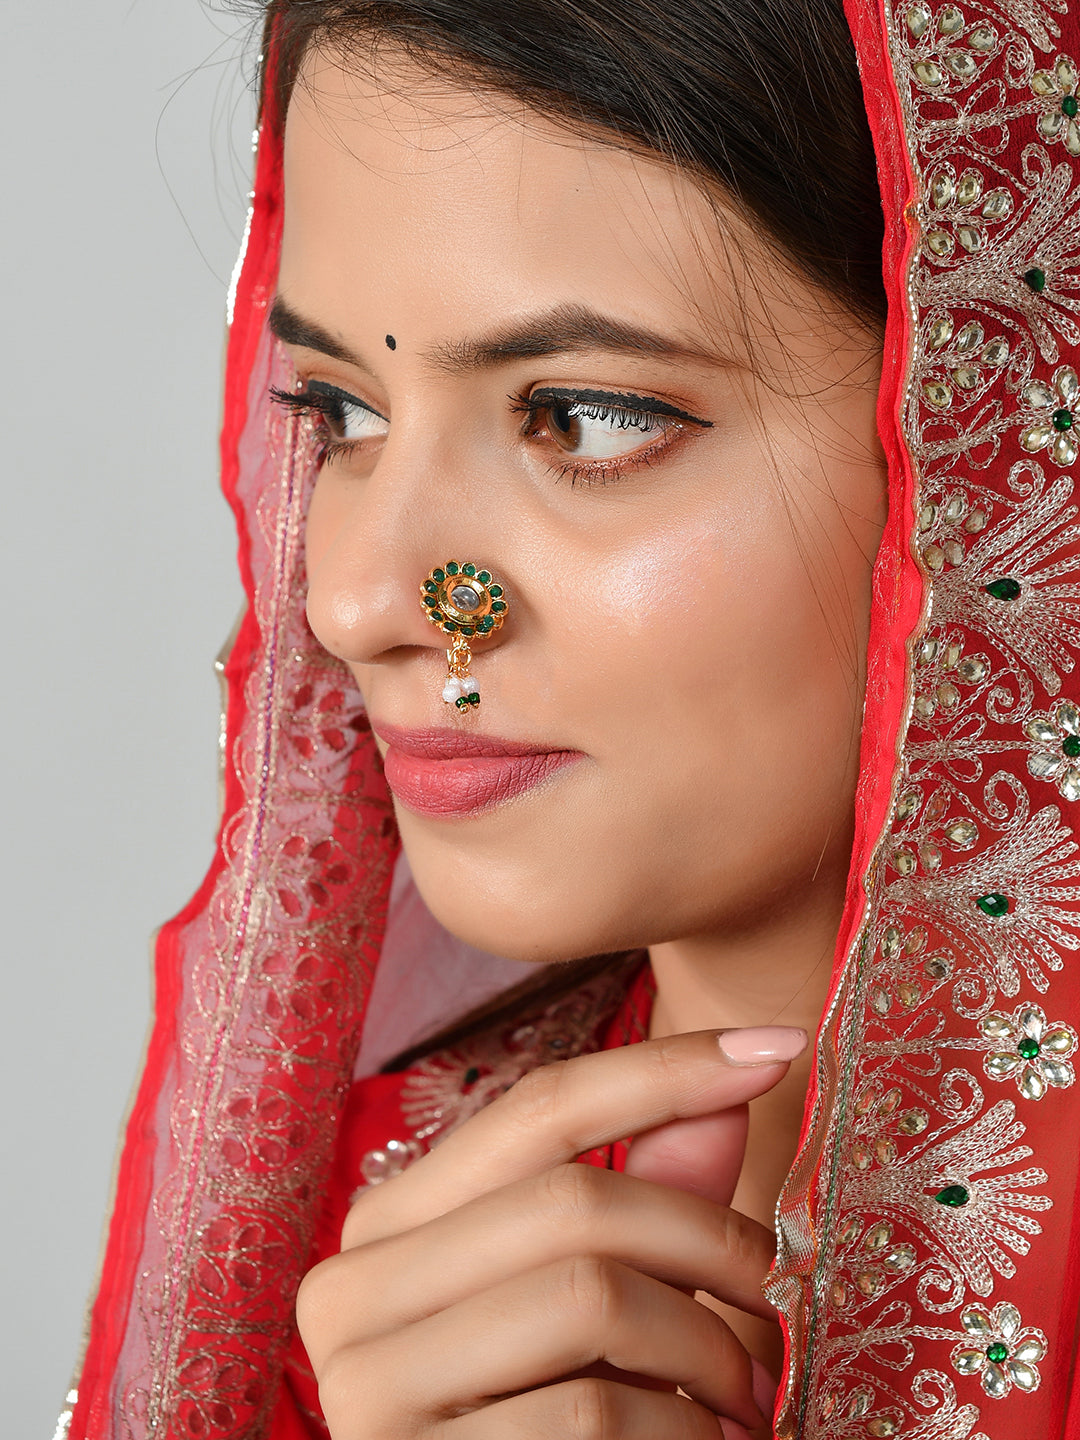 Bridal jewellery trends for 2019 - The Statesman